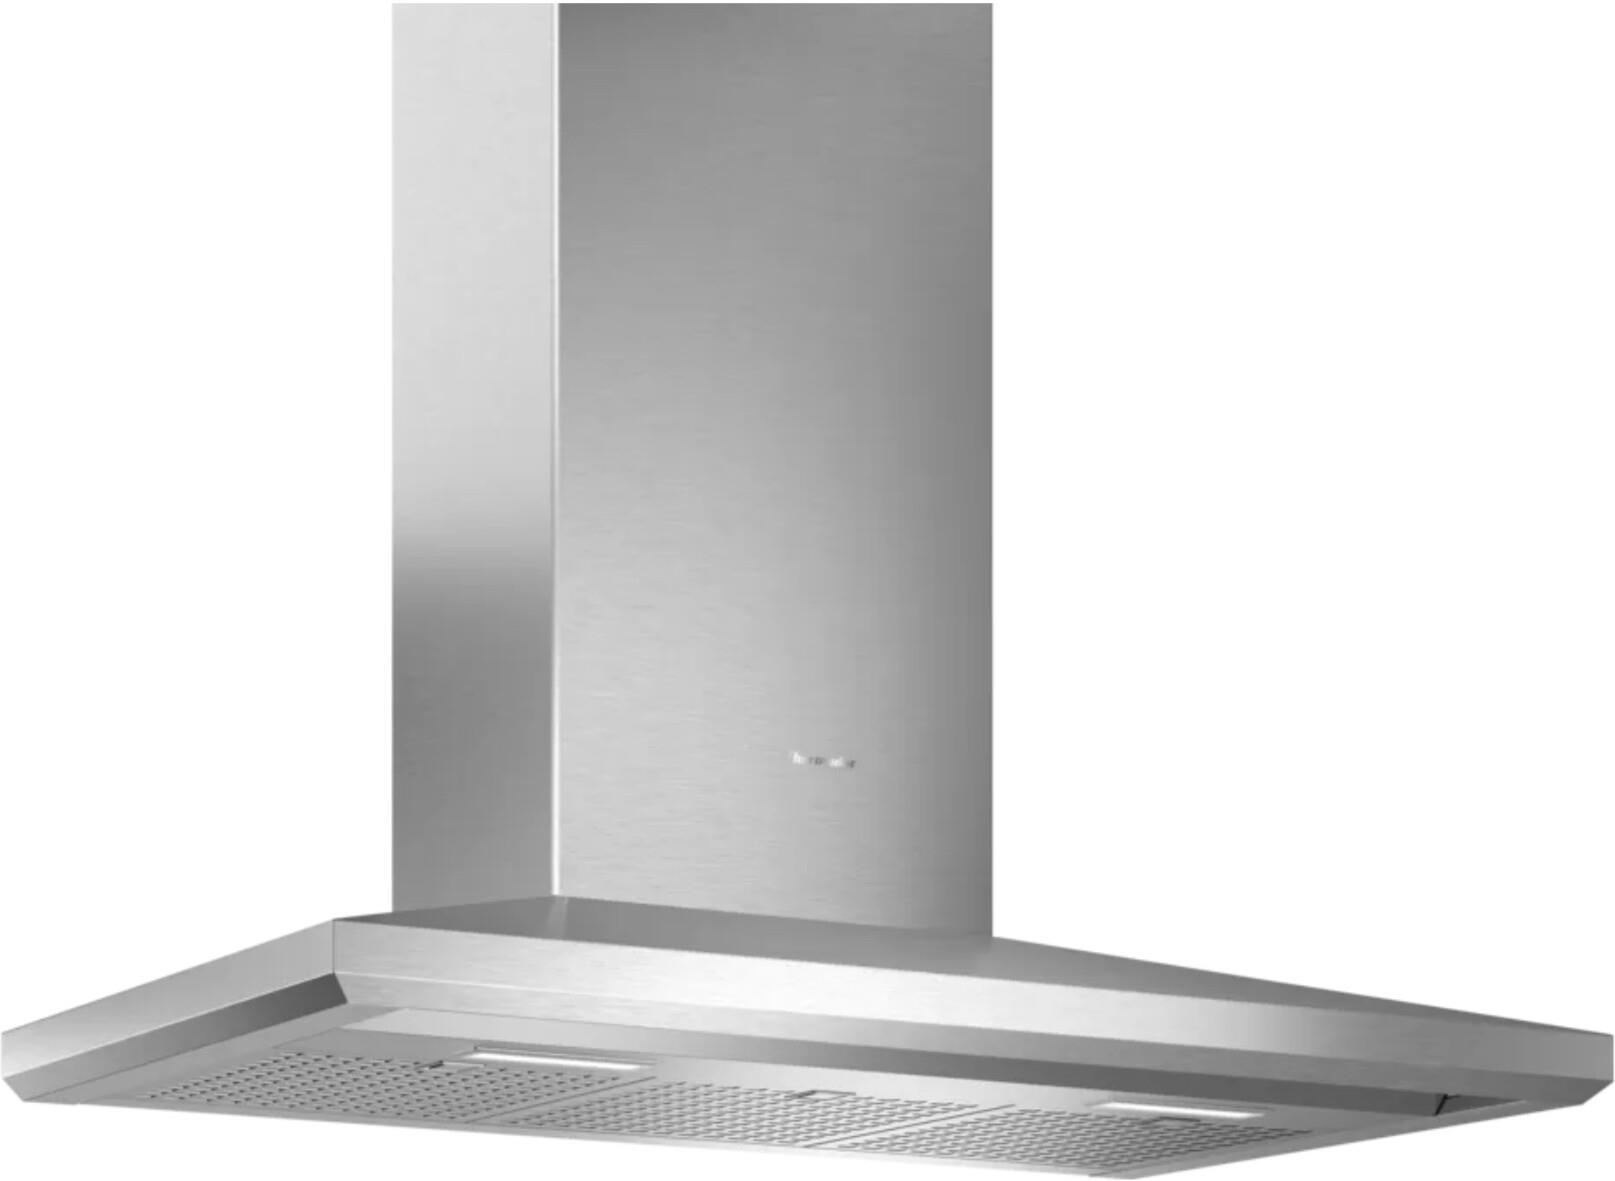 Thermador Masterpiece 36 Wall Mount Chimney Style Range Hood HMCB36WS